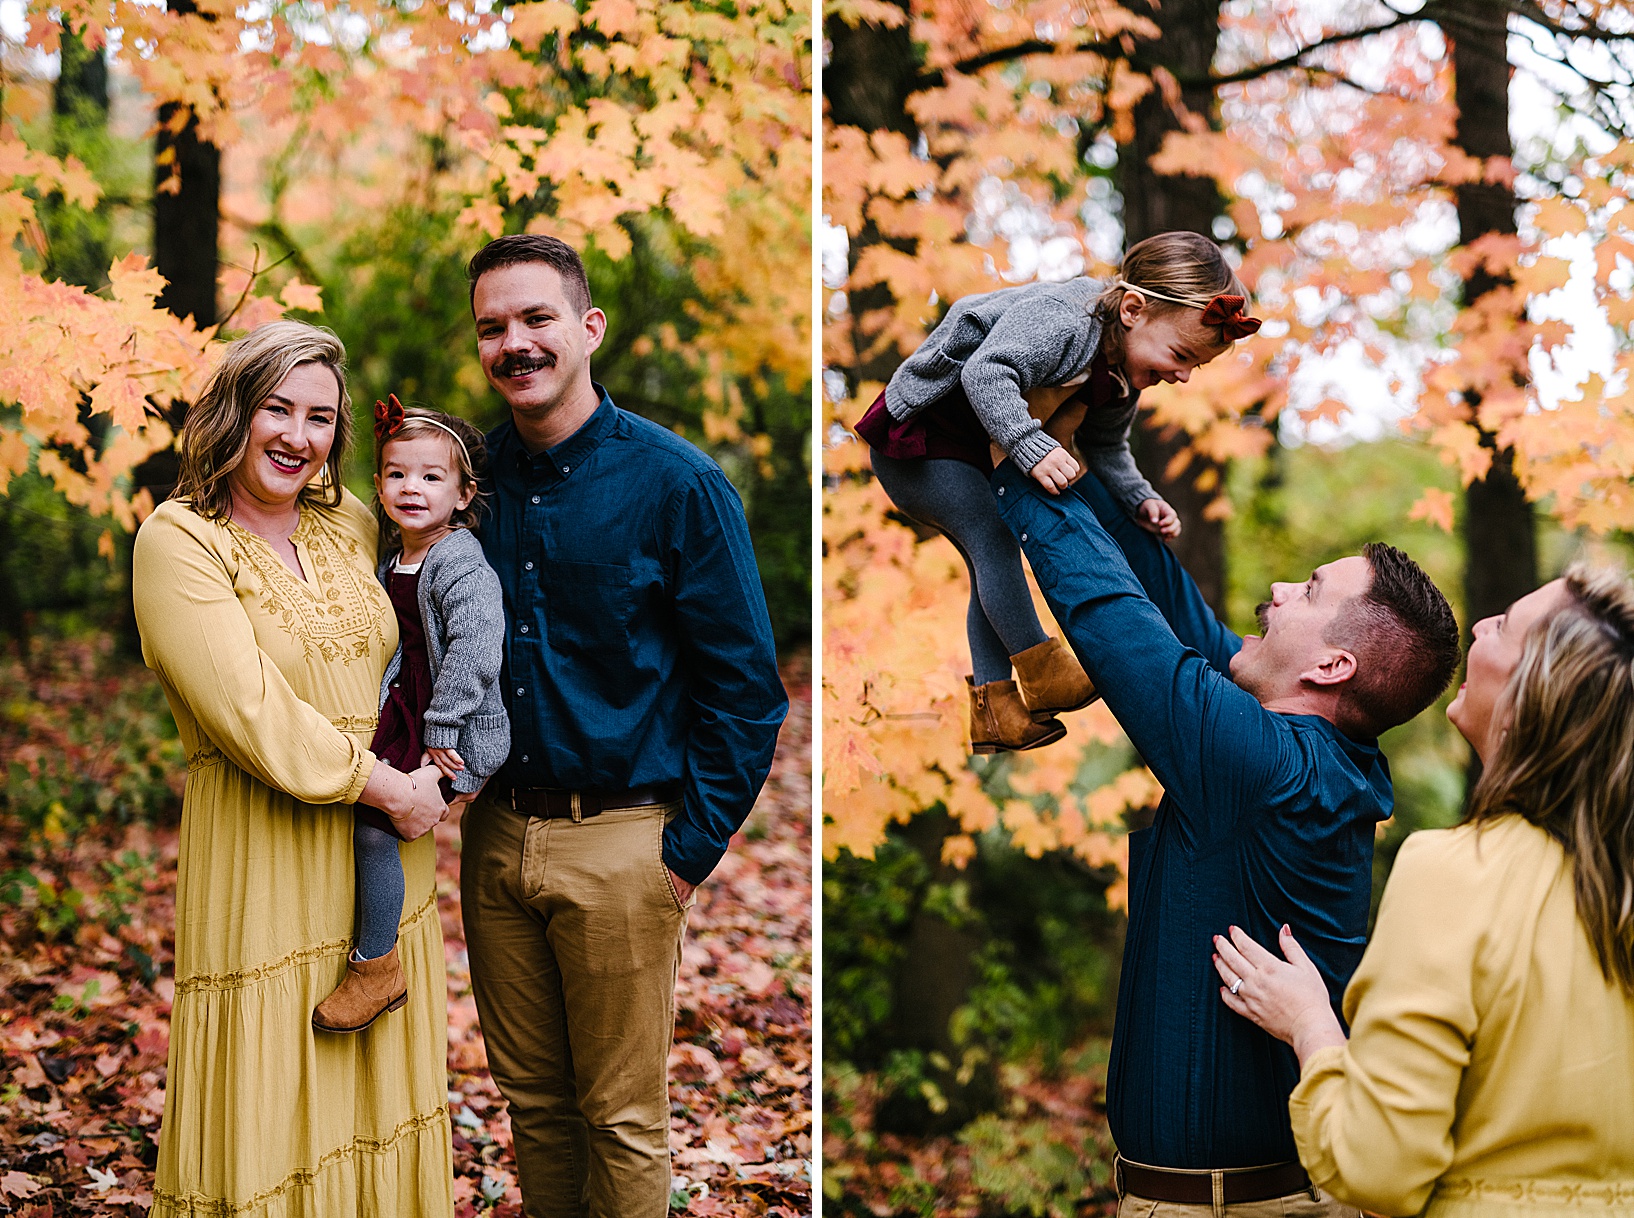 Blonde woman in mustard colored dress claps and laughs as man lifts their daughter up into the air in front of gorgeous fall foliage.